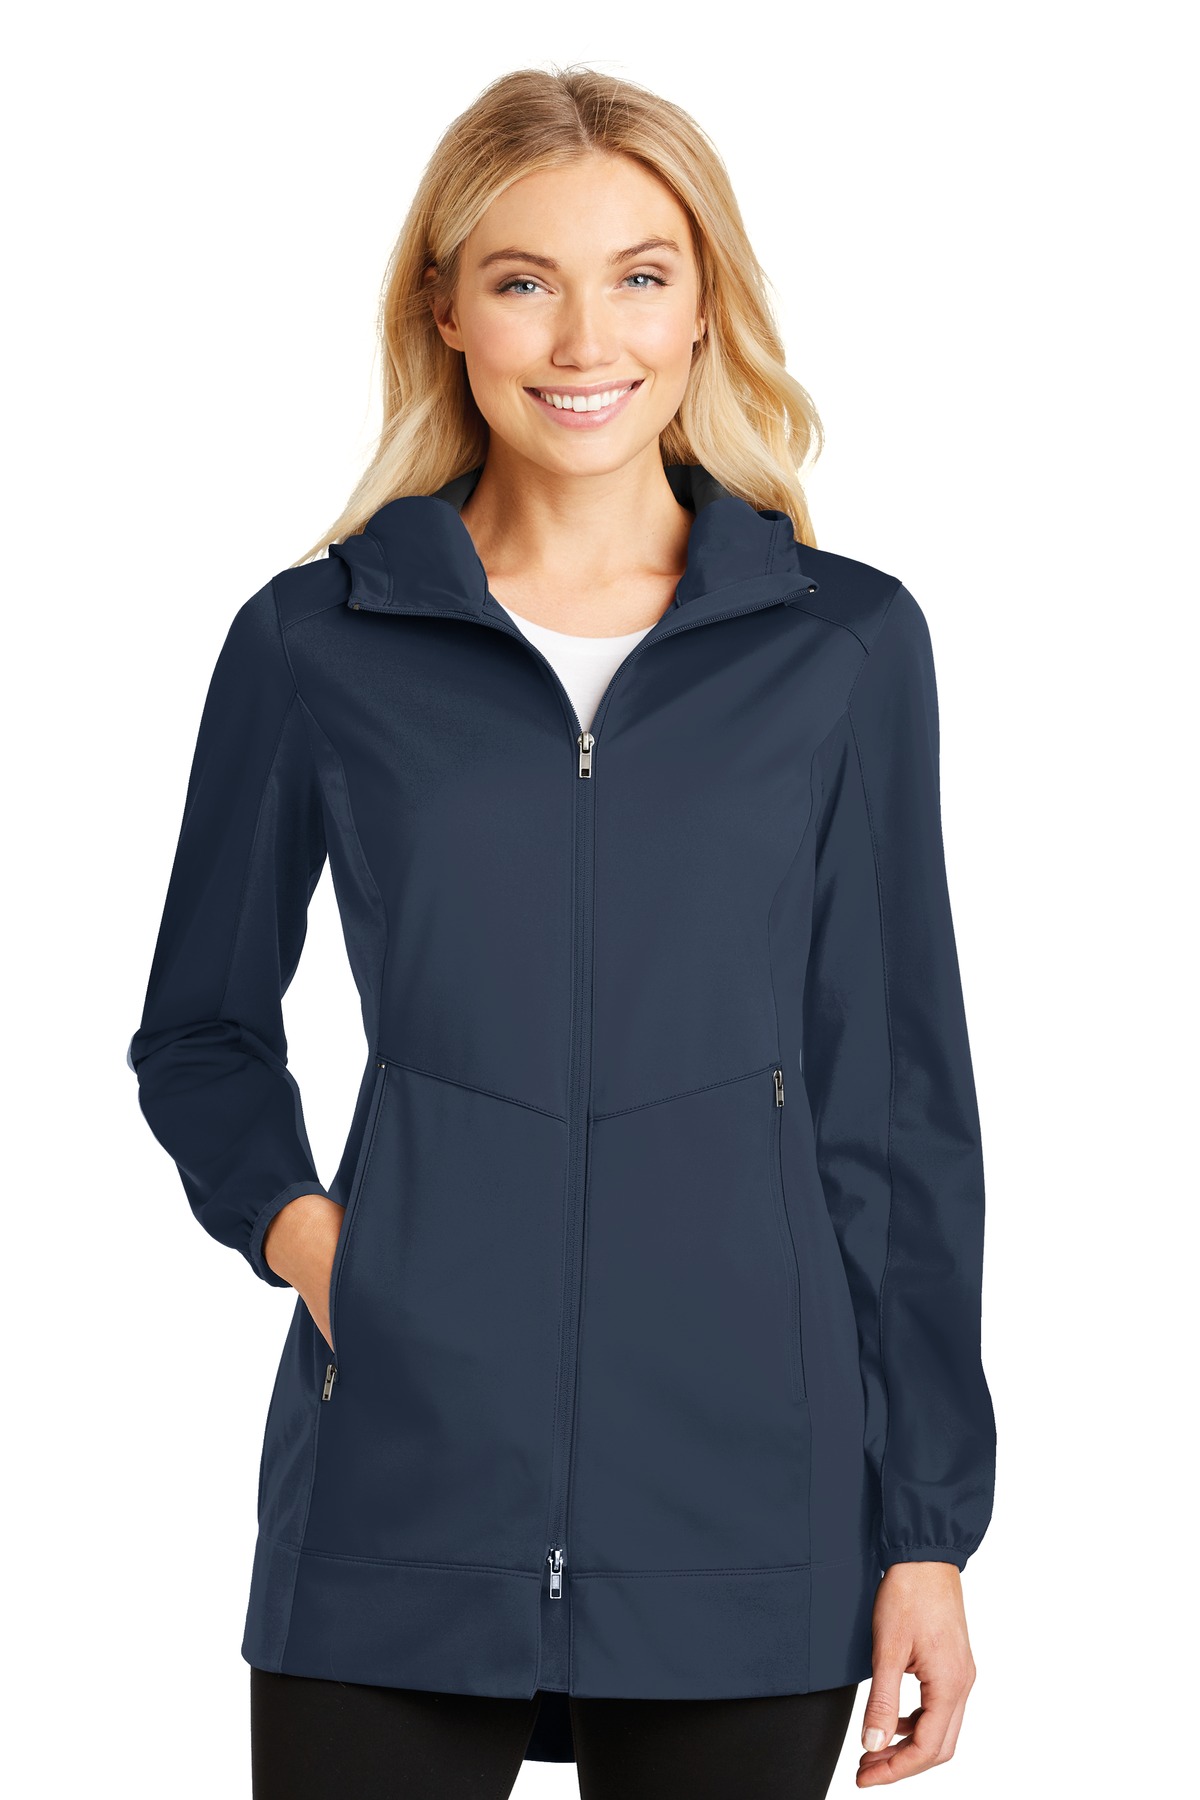 Port Authority Ladies Active Hooded Soft Shell Jacket. L719